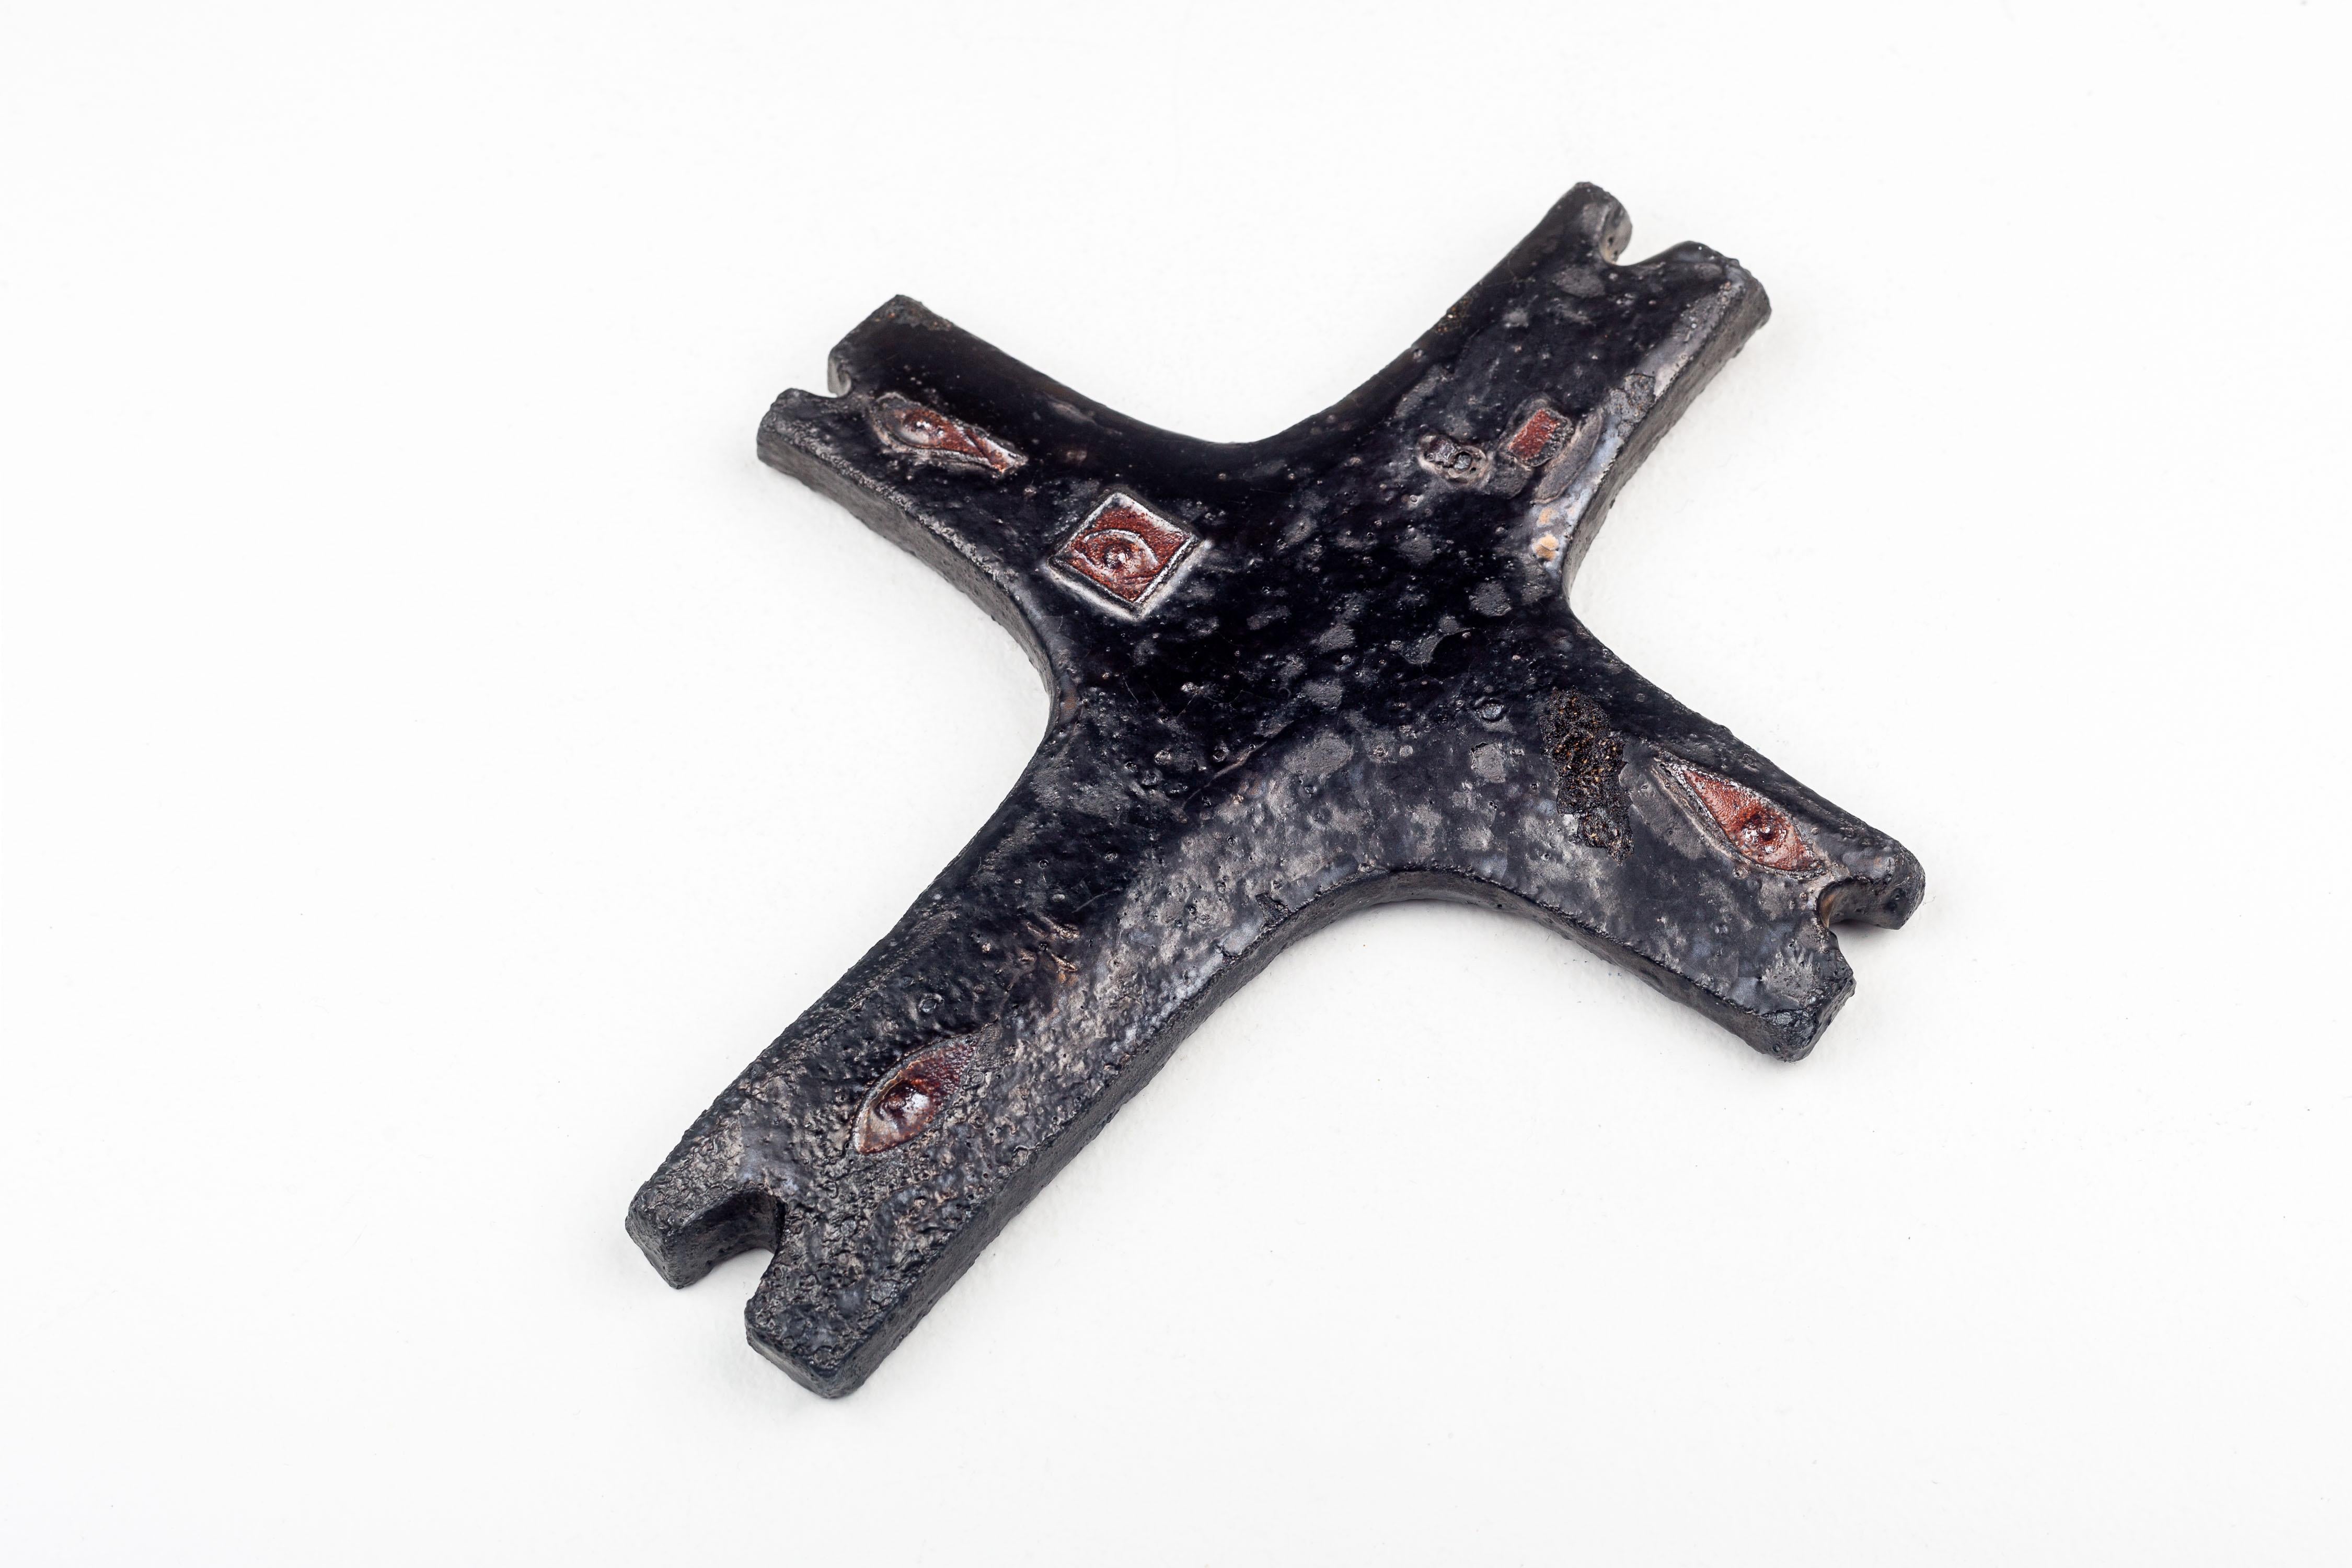 This ceramic cross is a remarkable representation of mid-century European studio pottery, reflecting the era's interest in abstract and symbolic forms. Handcrafted by a skilled artist, the cross is finished with a distinctive glaze that gives it an